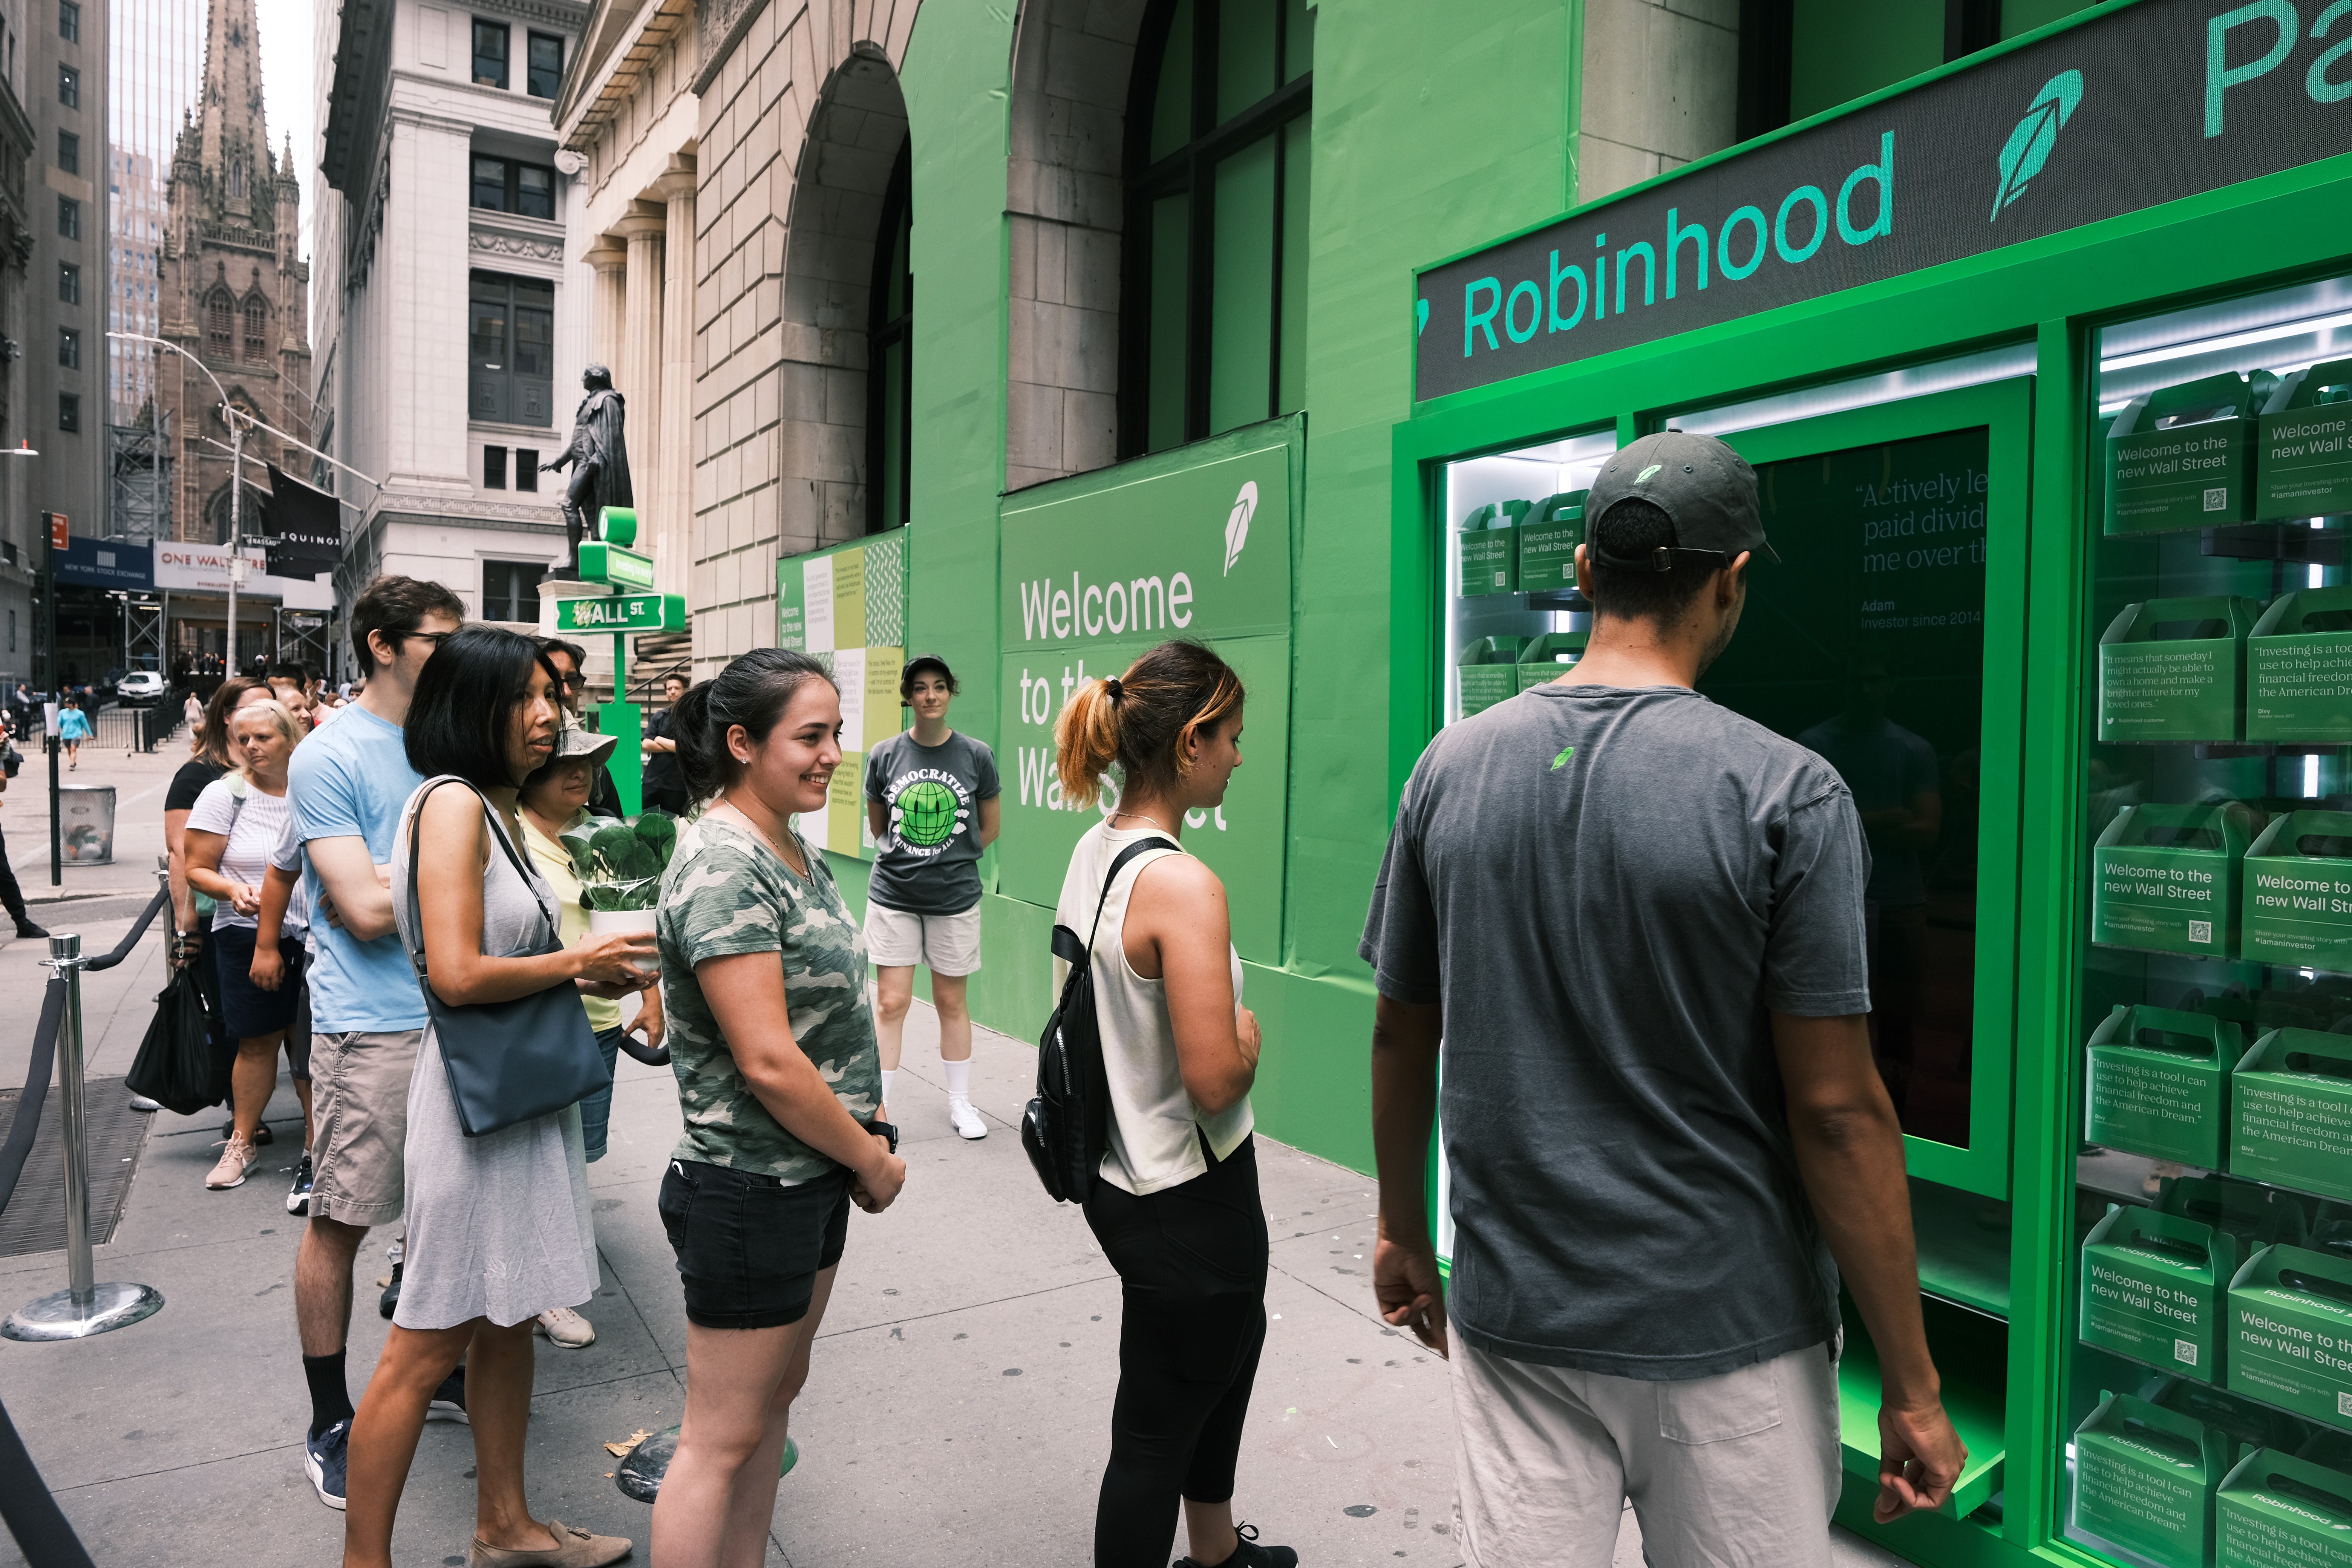 People wait in line for T-shirts at a pop-up kiosk for the online brokerage Robinhood along Wall Street after the company went public with an IPO